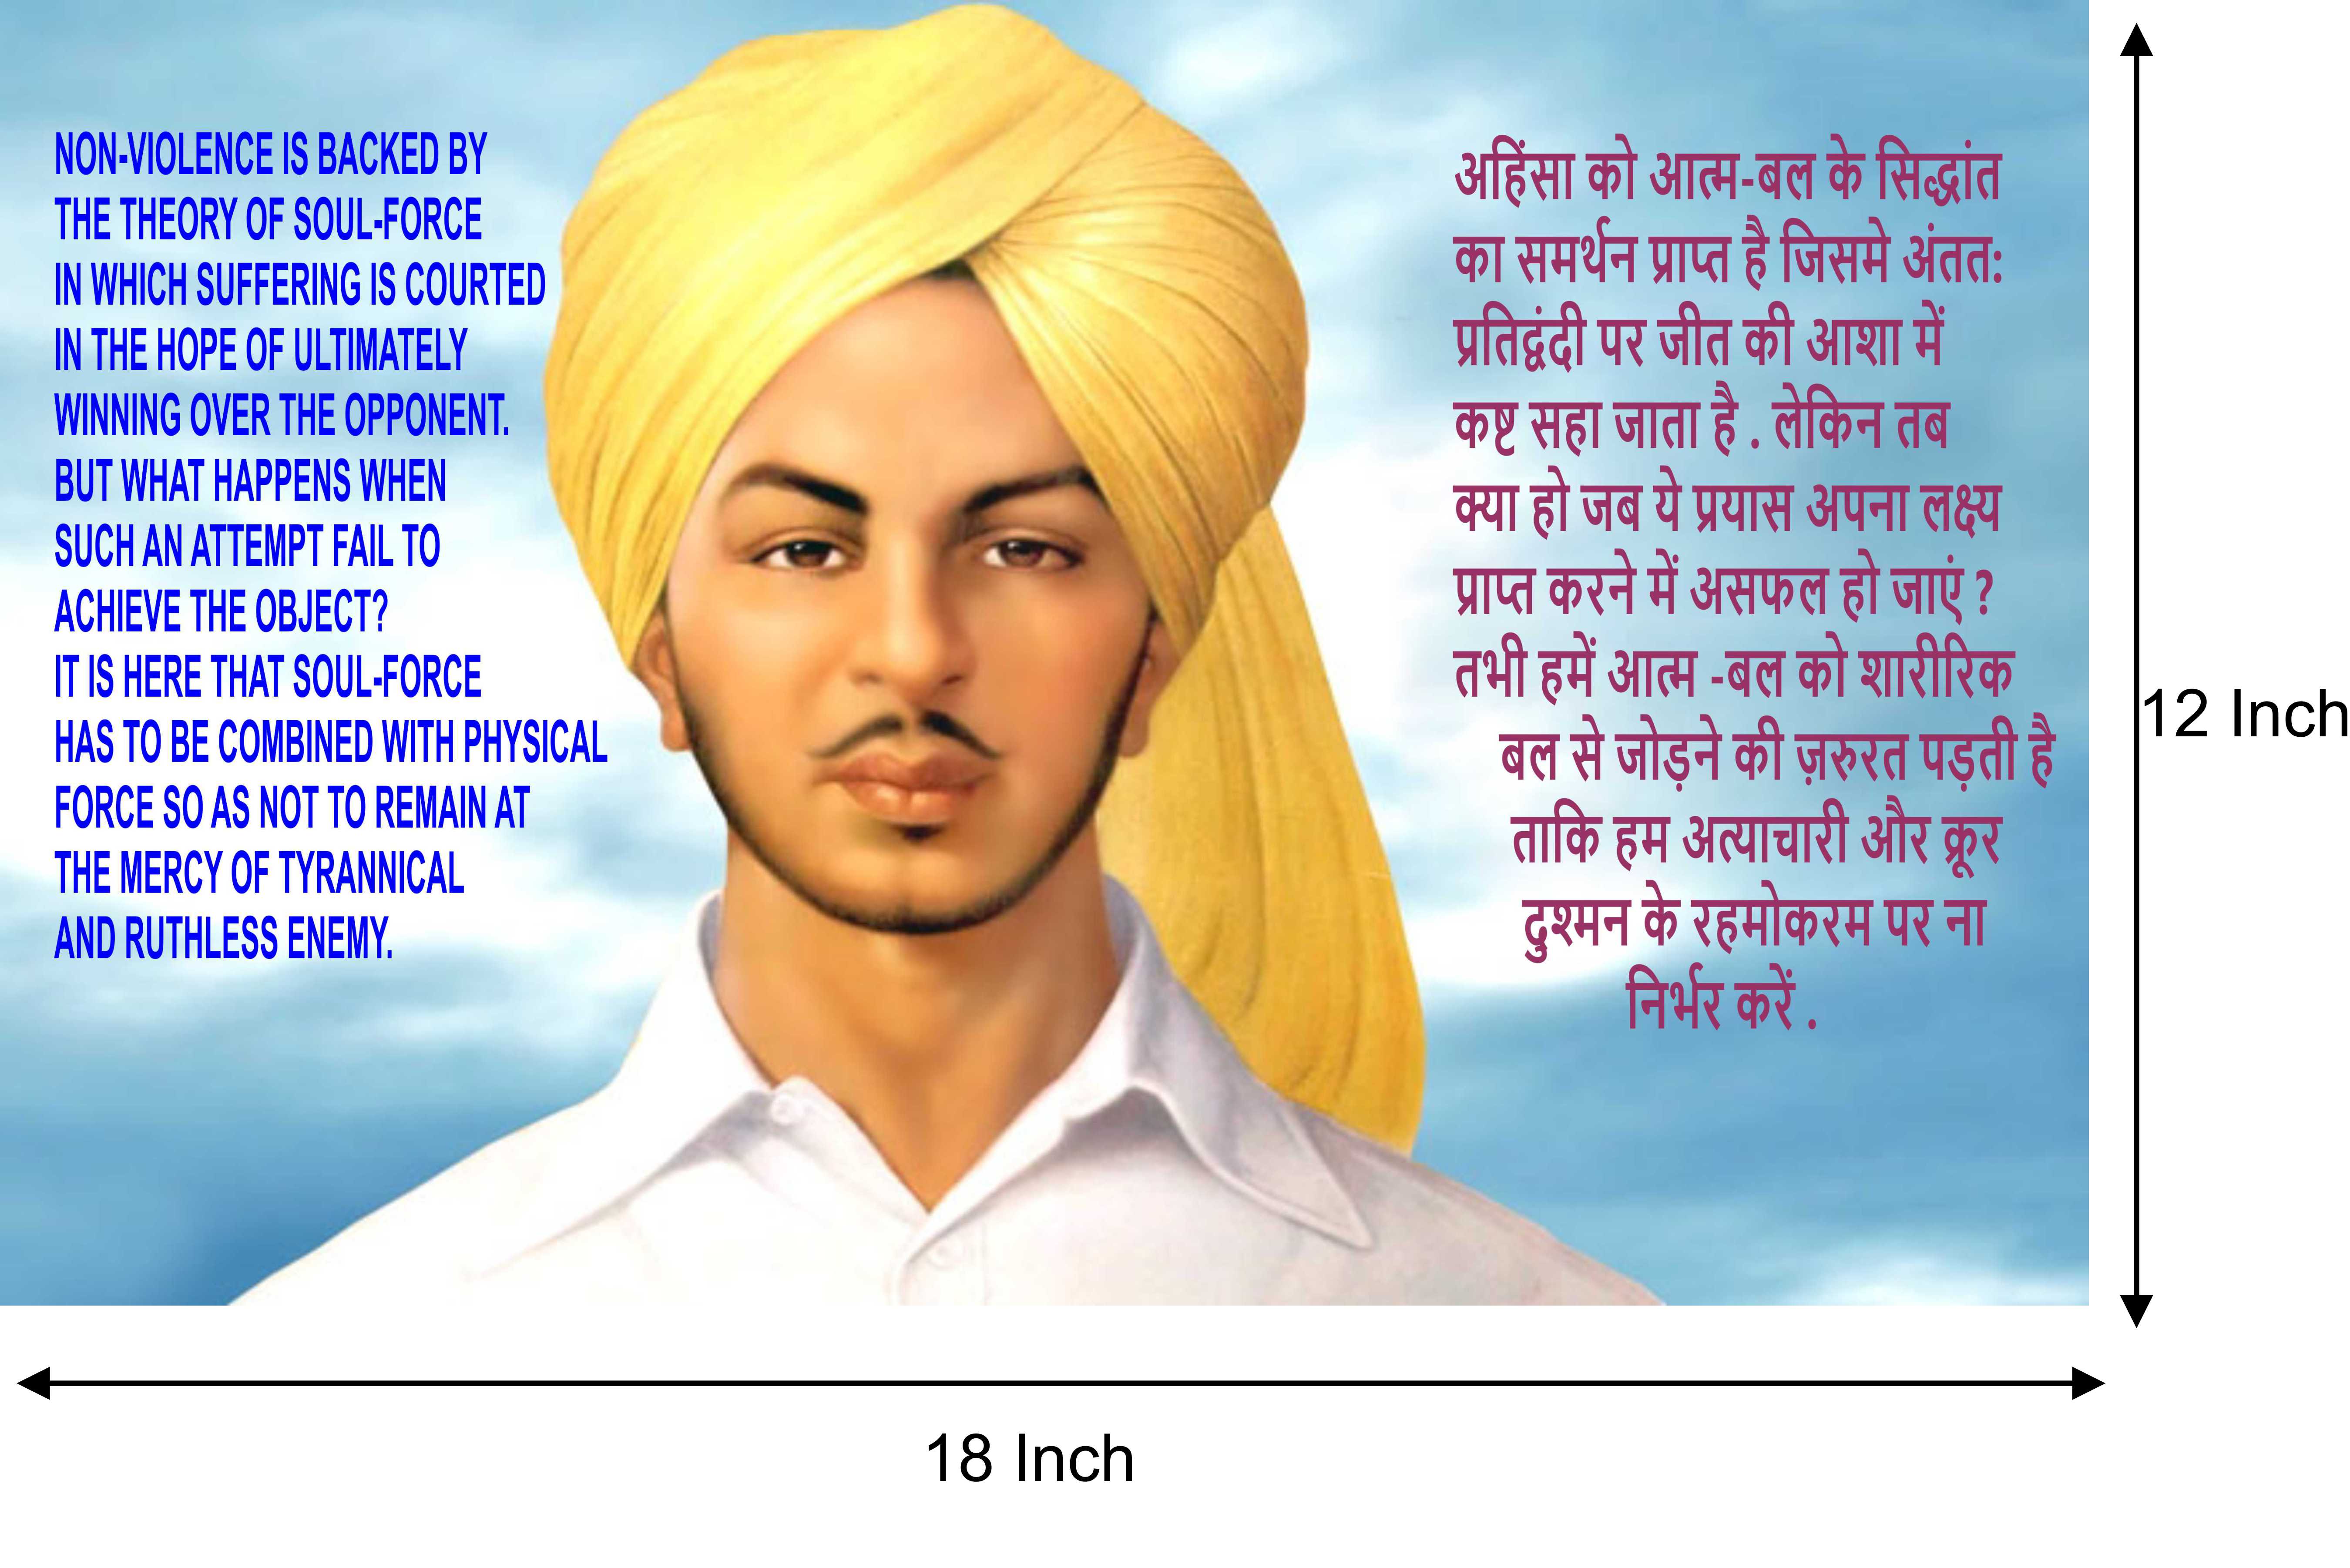 Buy Bhagat Singh Poster - Motivational Quotes and Inspirational Quotes